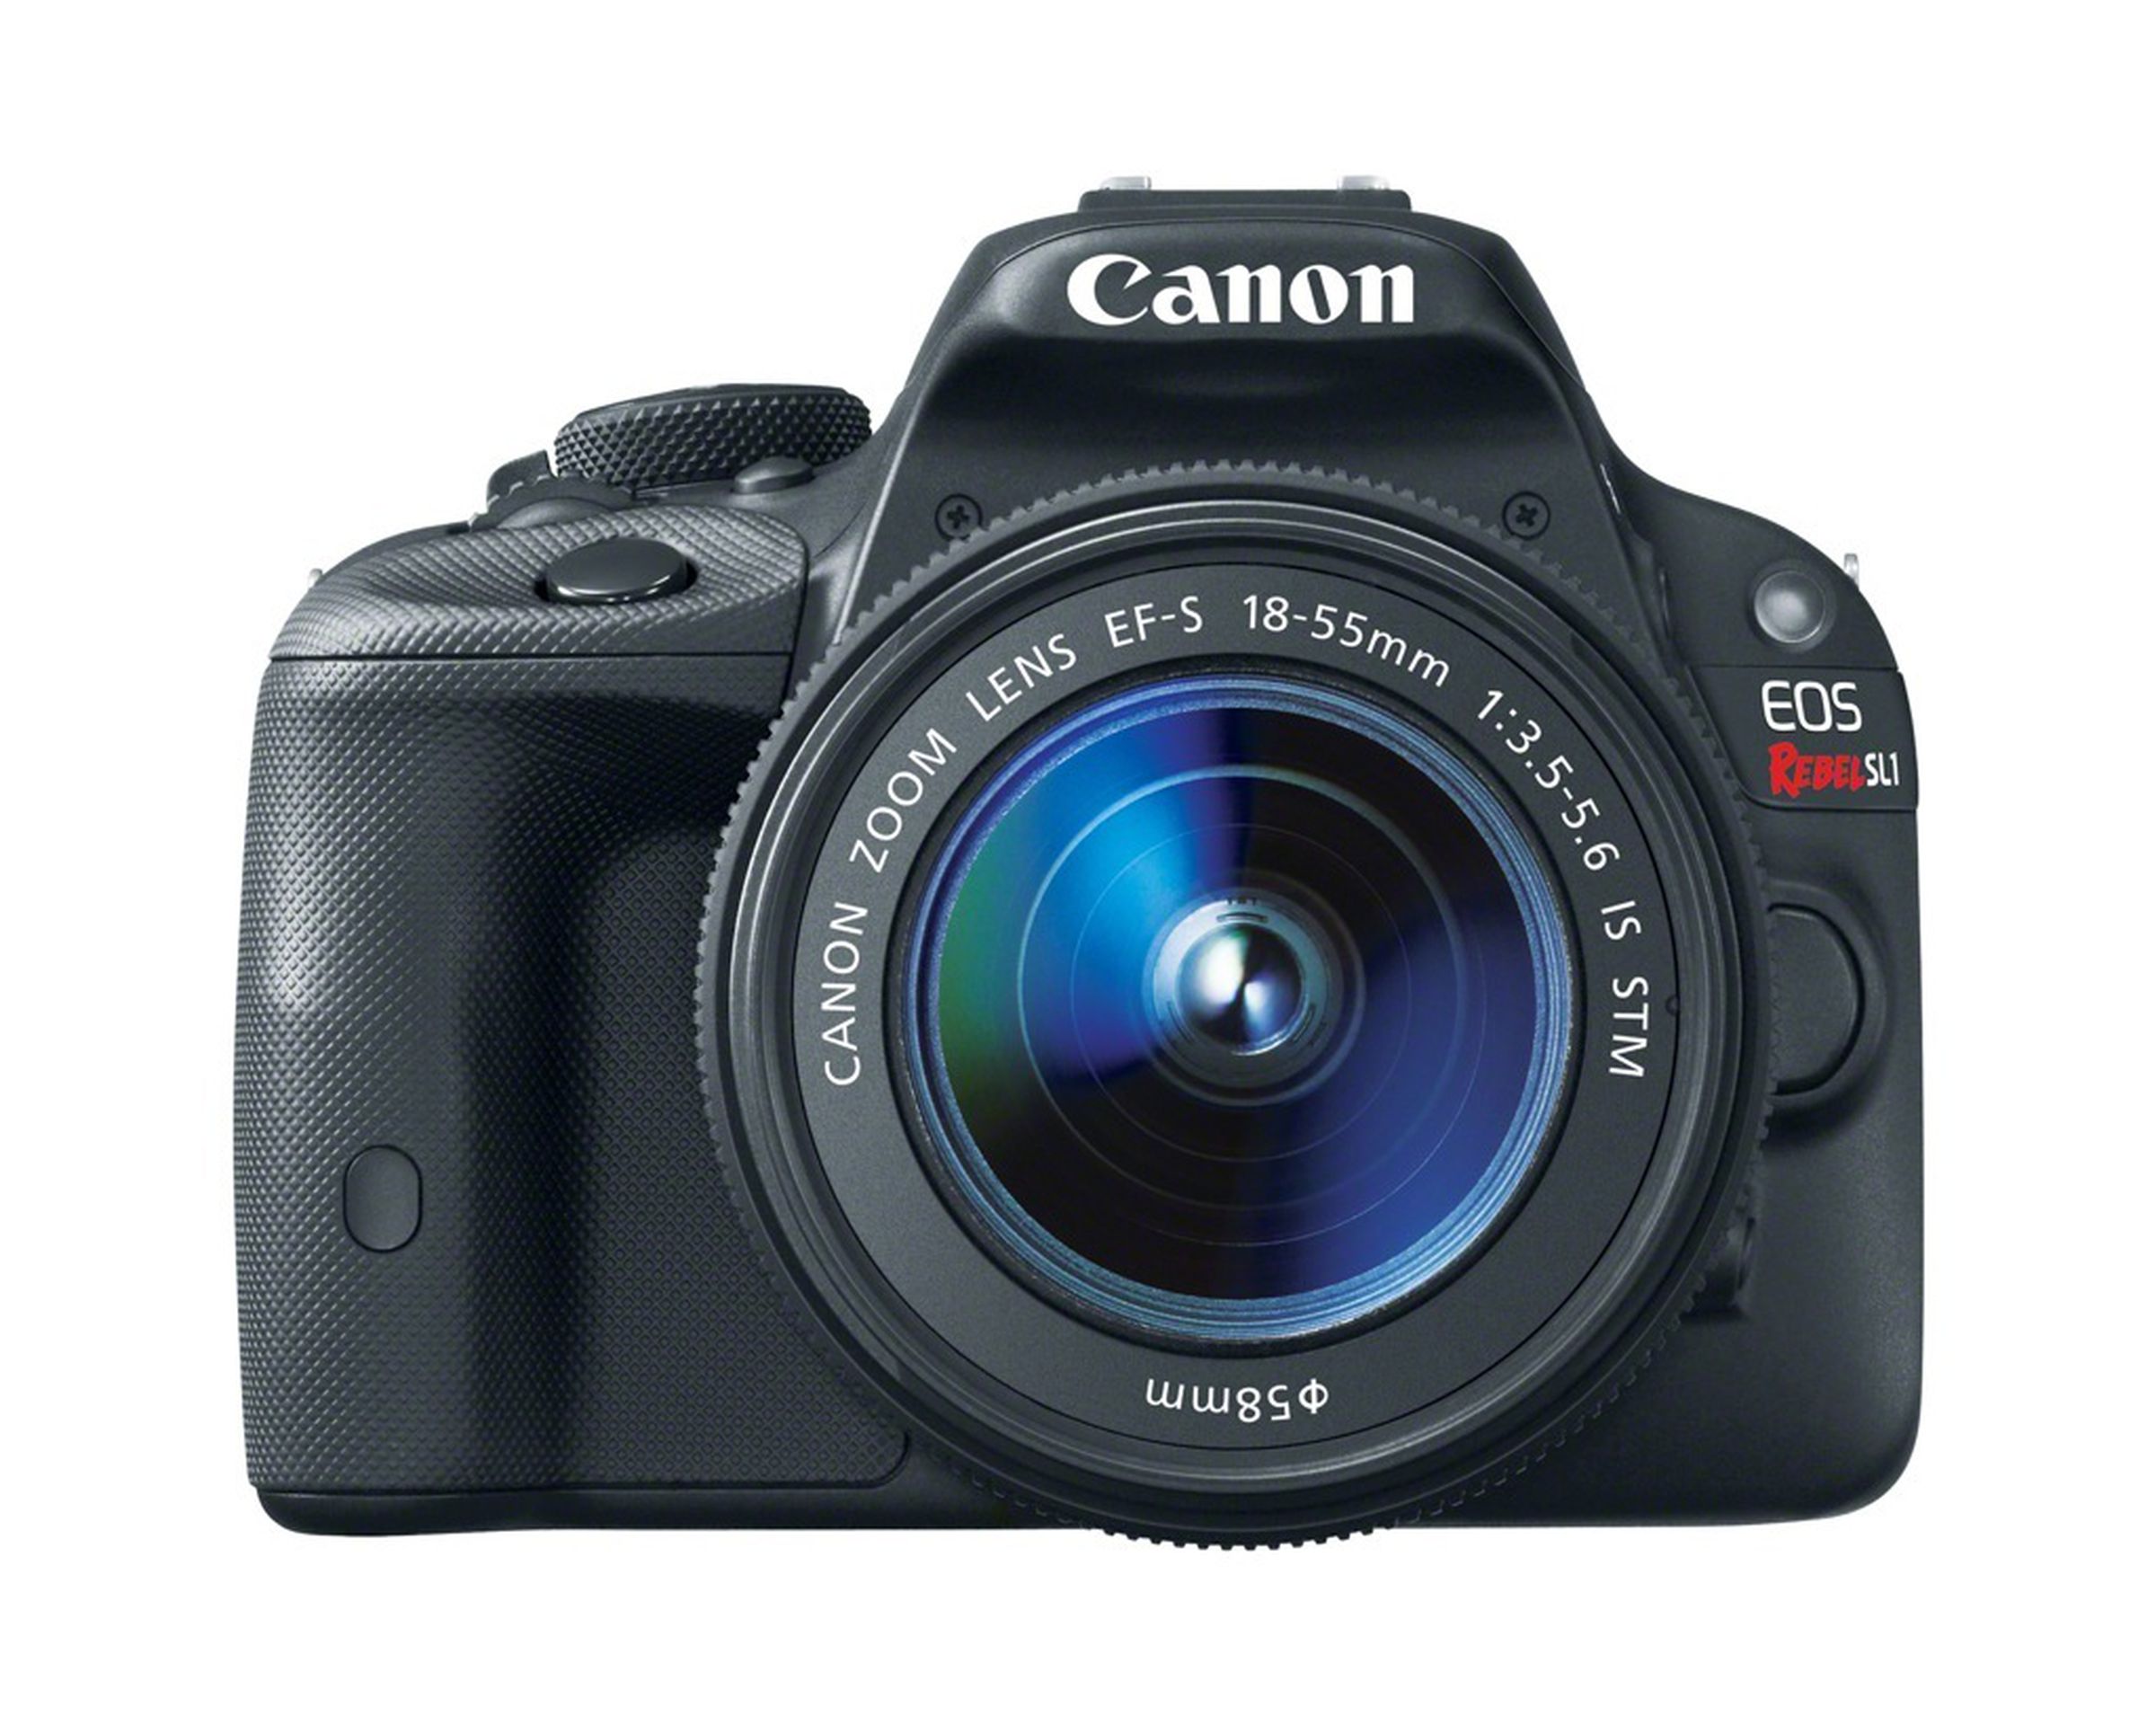 Canon EOS Rebel SL1, Rebel T5i, and PowerShot SX280 HS pictures